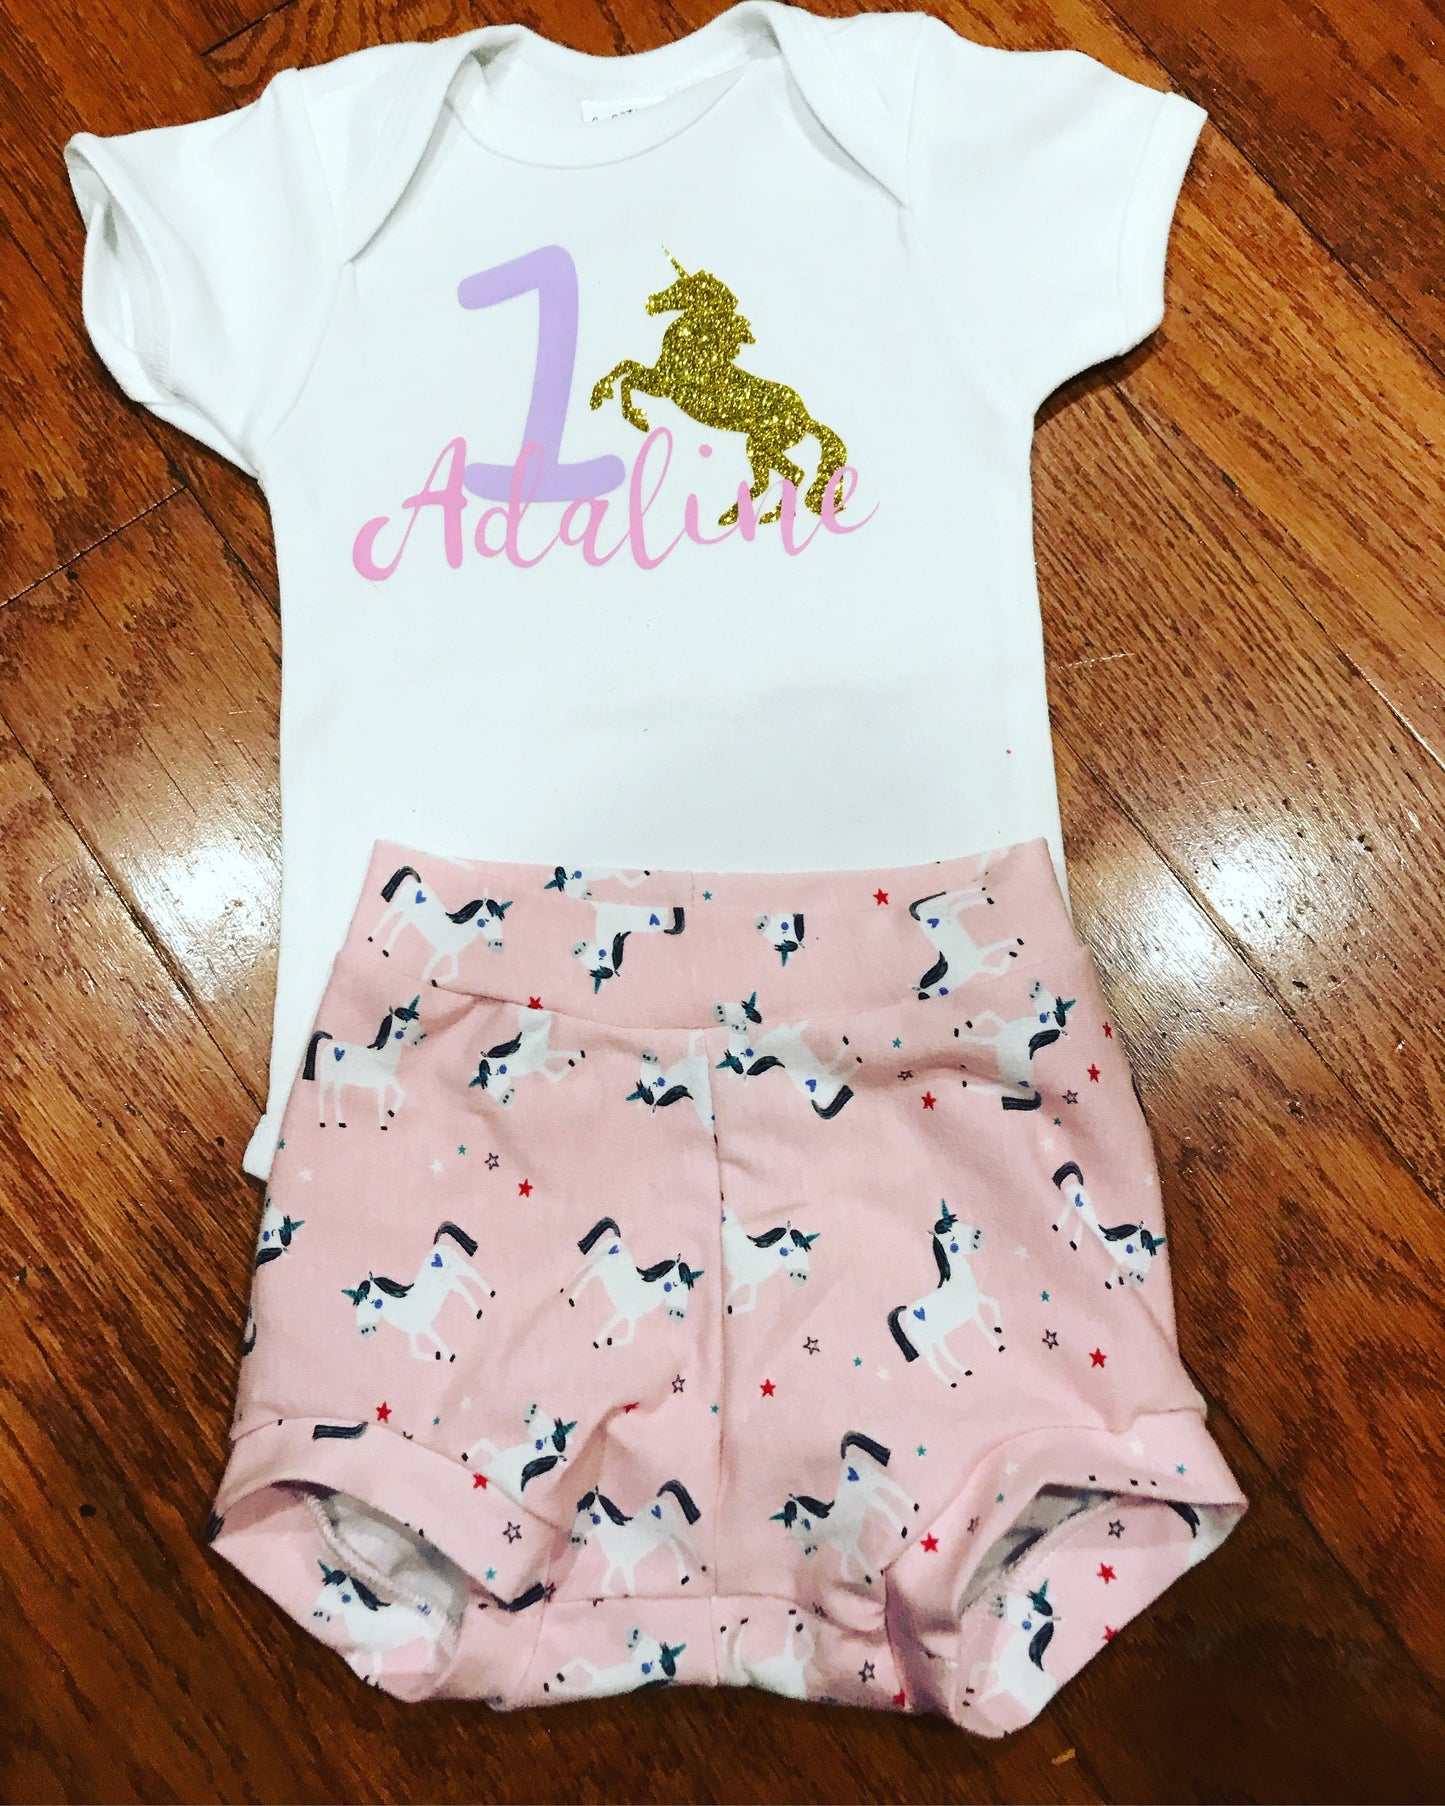 Handcrafted Children's Clothing, Clothing for Children and Parents, Unicorn 1st Birthday Shirt, chi-fashionista